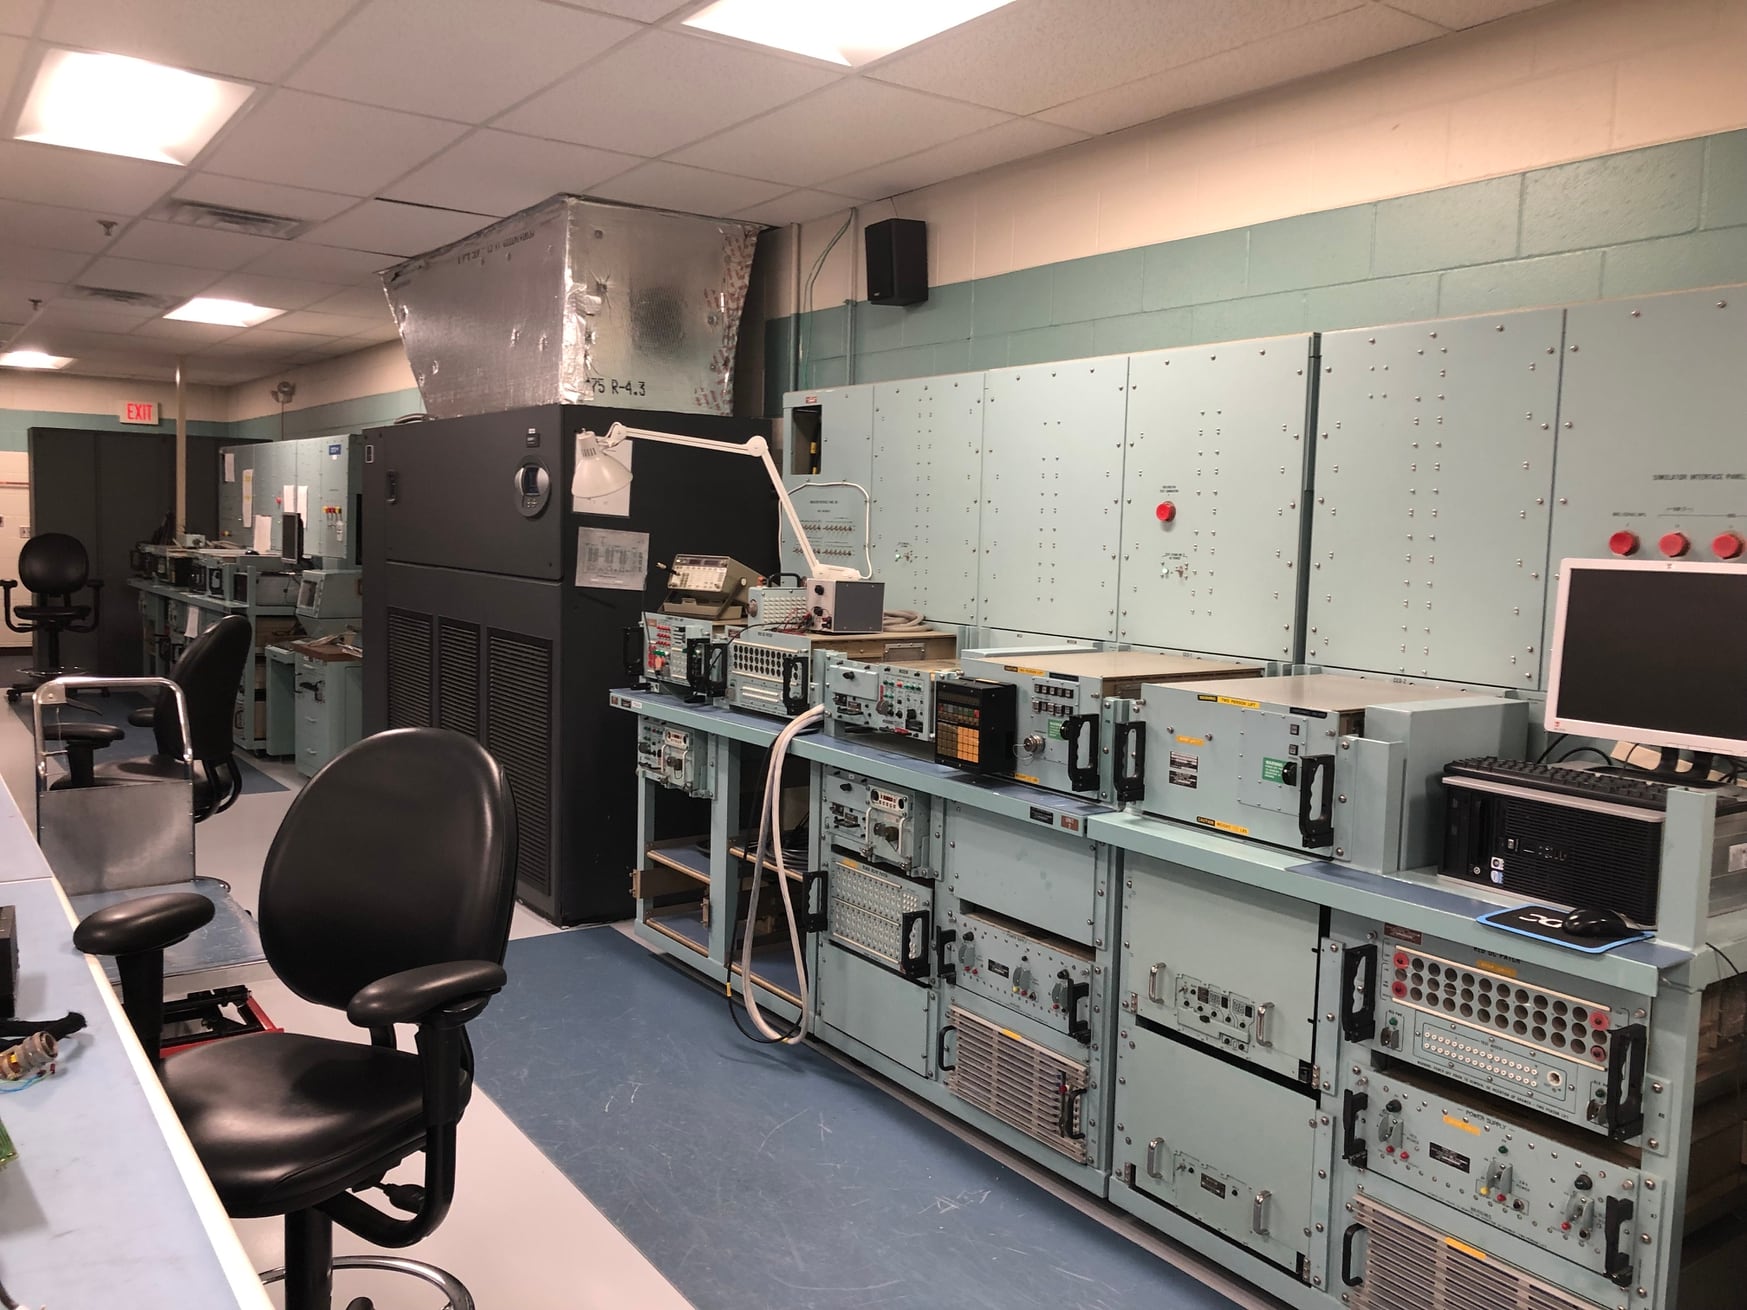 Elements of the Strategic Automated Command and Control System, seen here, go through diagnostic testing by the 595th Strategic Communications Squadron at Offutt Air Force Base, Neb. (Valerie Insinna/Staff)